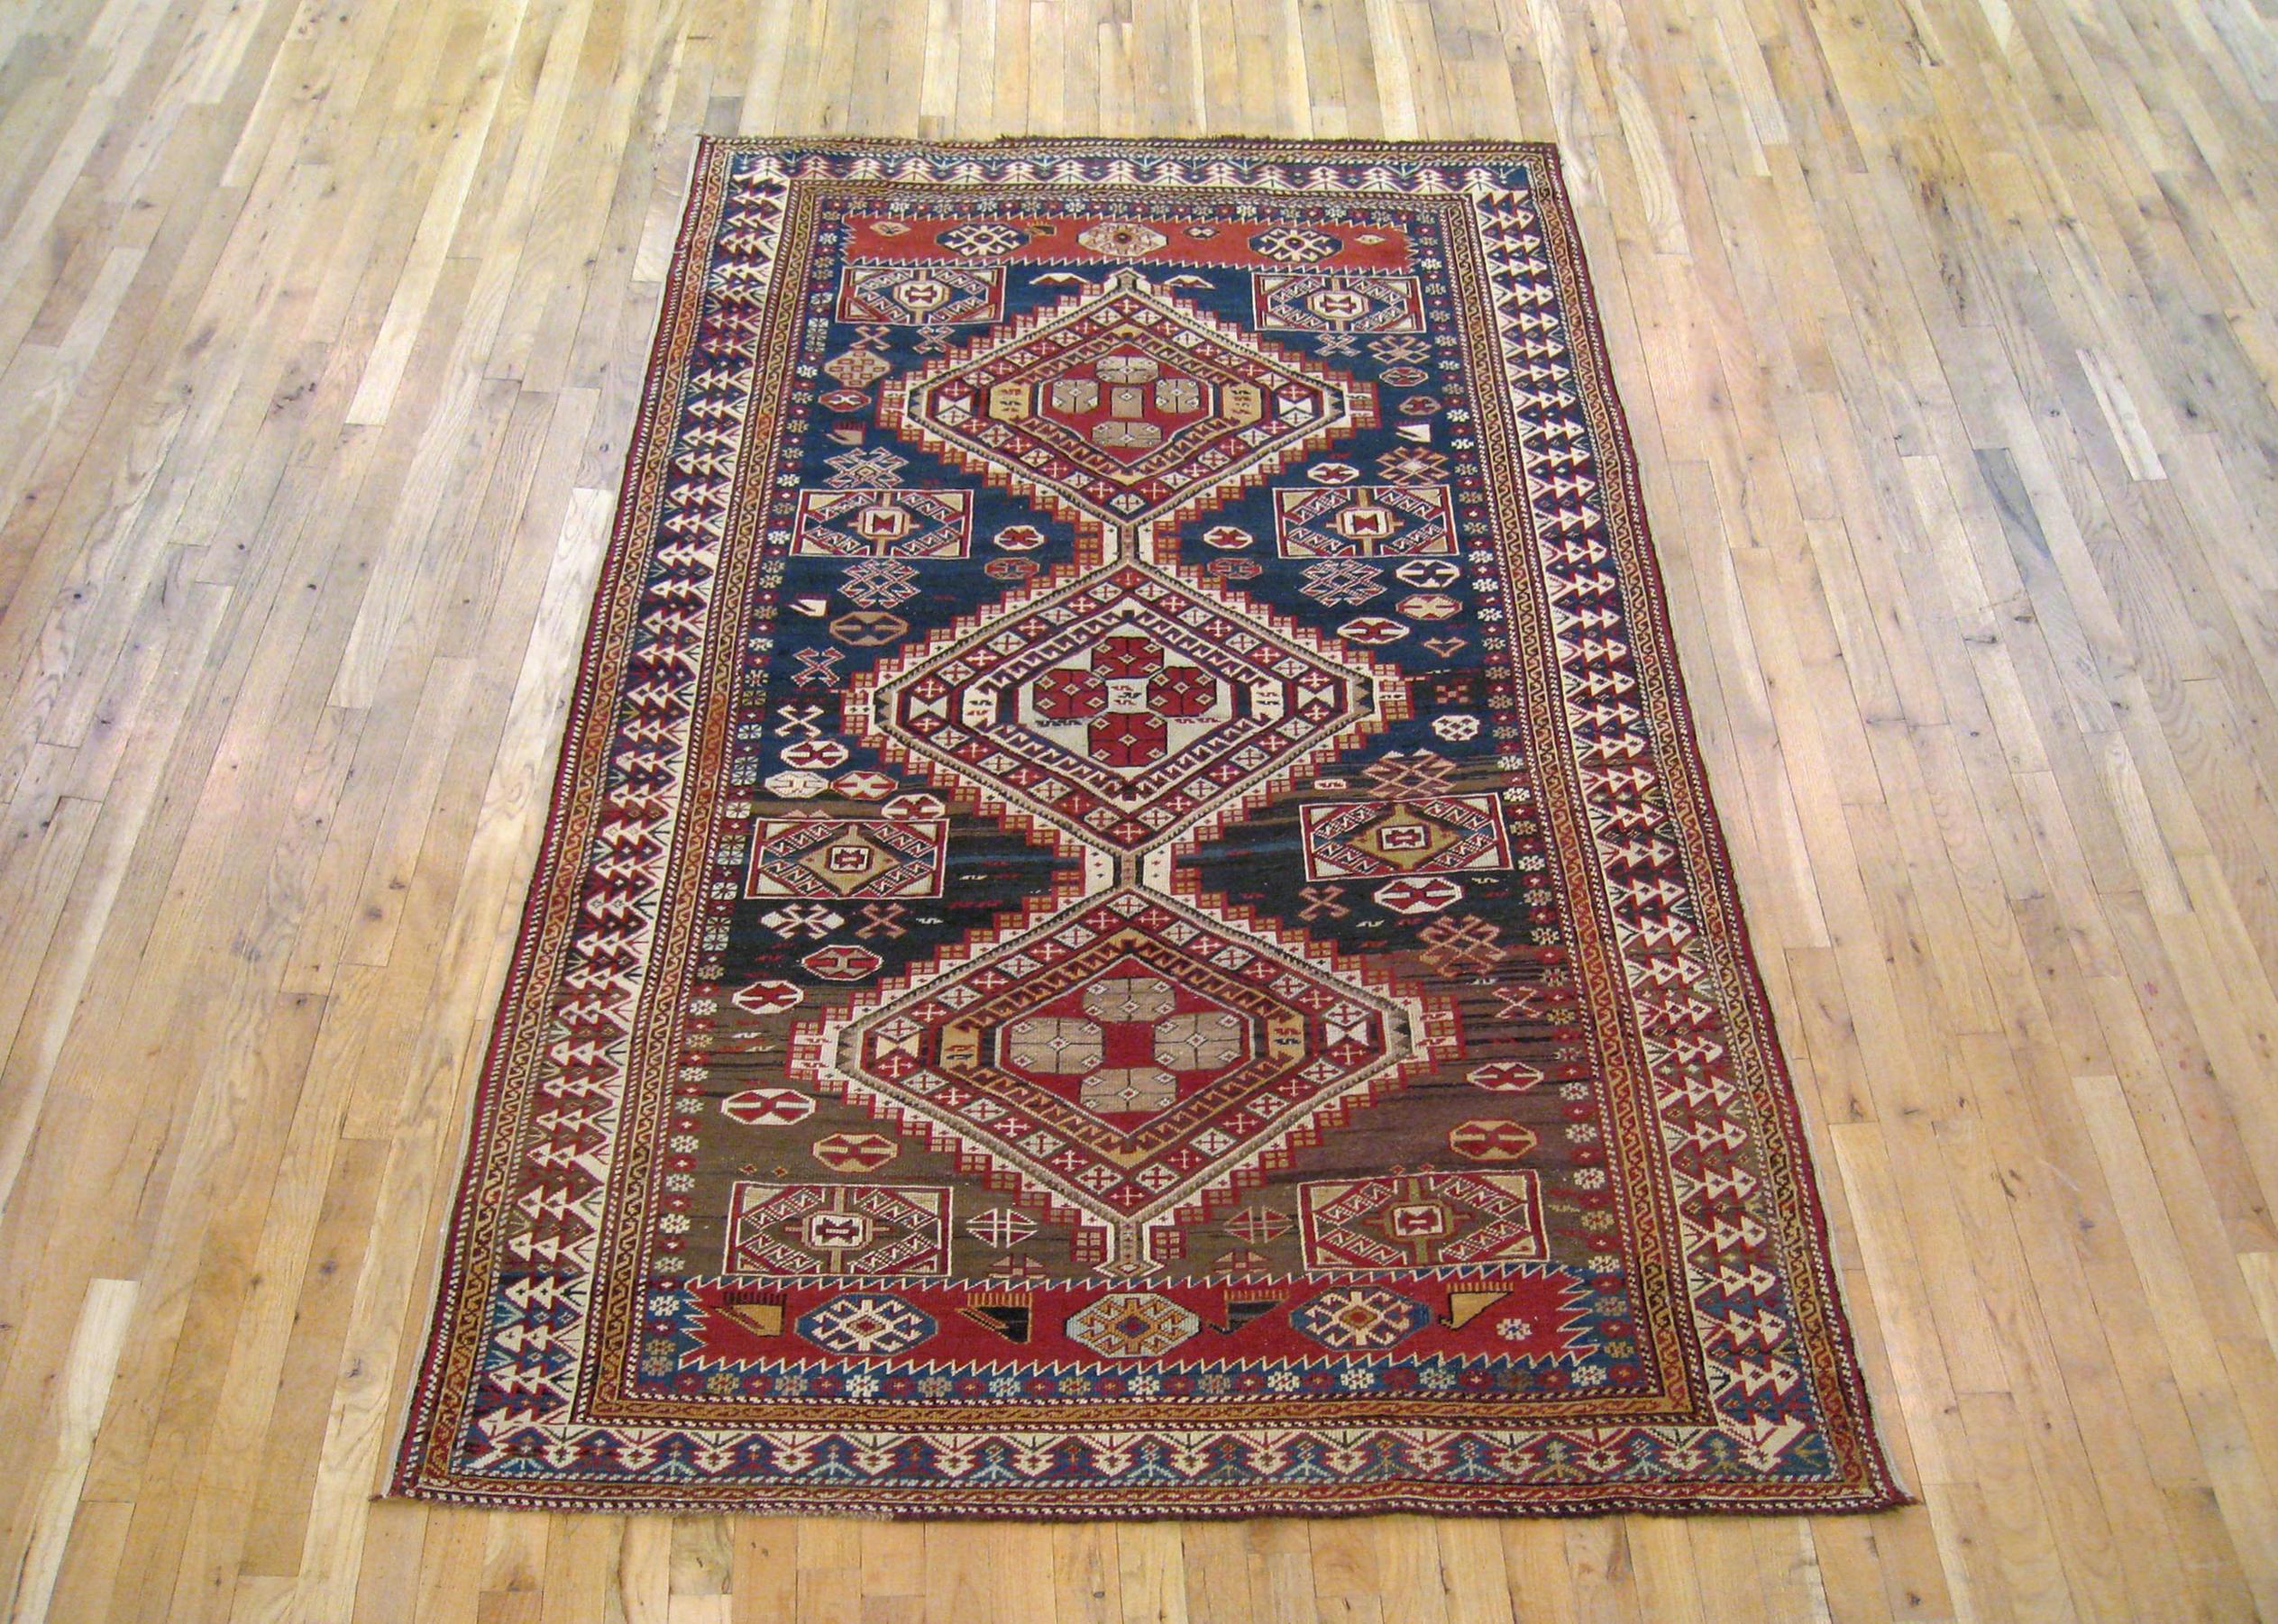 Antique Caucasian Shirvan rug, Small size, circa 1890

A one-of-a-kind antique Caucasian Shirvan Oriental Carpet, hand-knotted with soft wool pile. This lovely hand-knotted carpet features multiple medallions with a diamond design on the brown